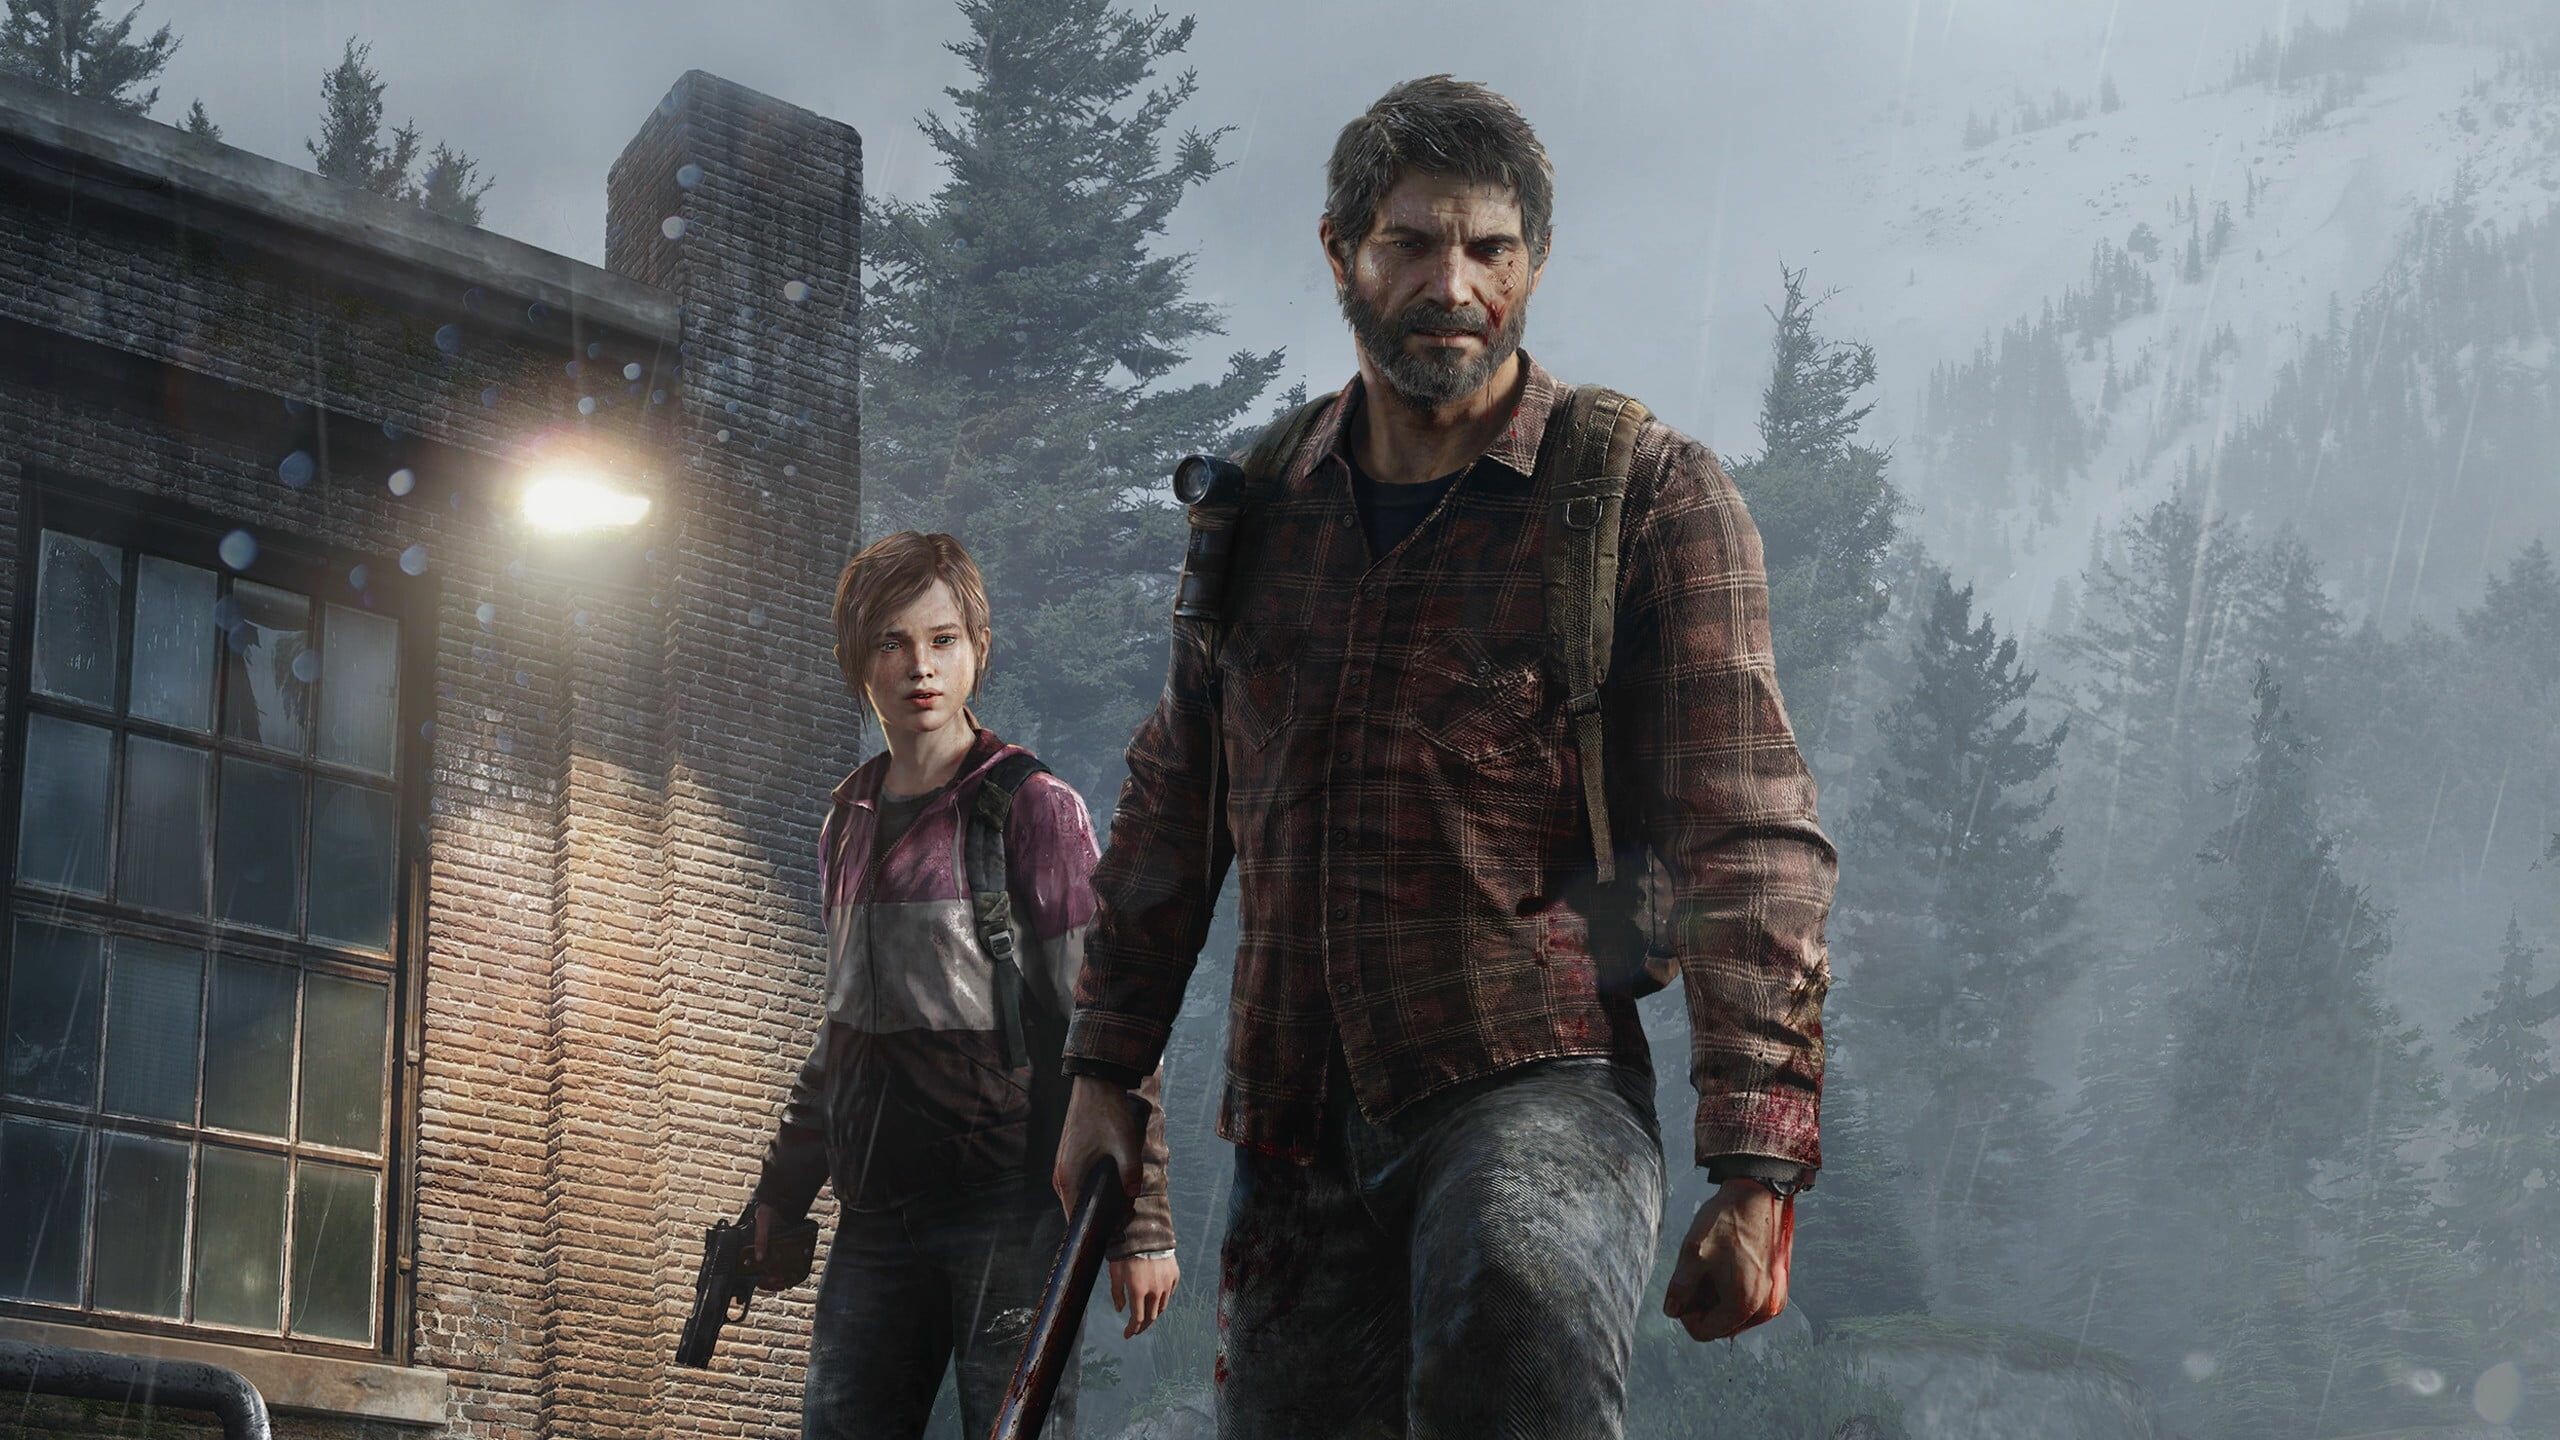 The Last of Us: For most of the game, the player takes control of Joel, a man tasked with escorting a young girl, Ellie, across the United States. 2560x1440 HD Background.